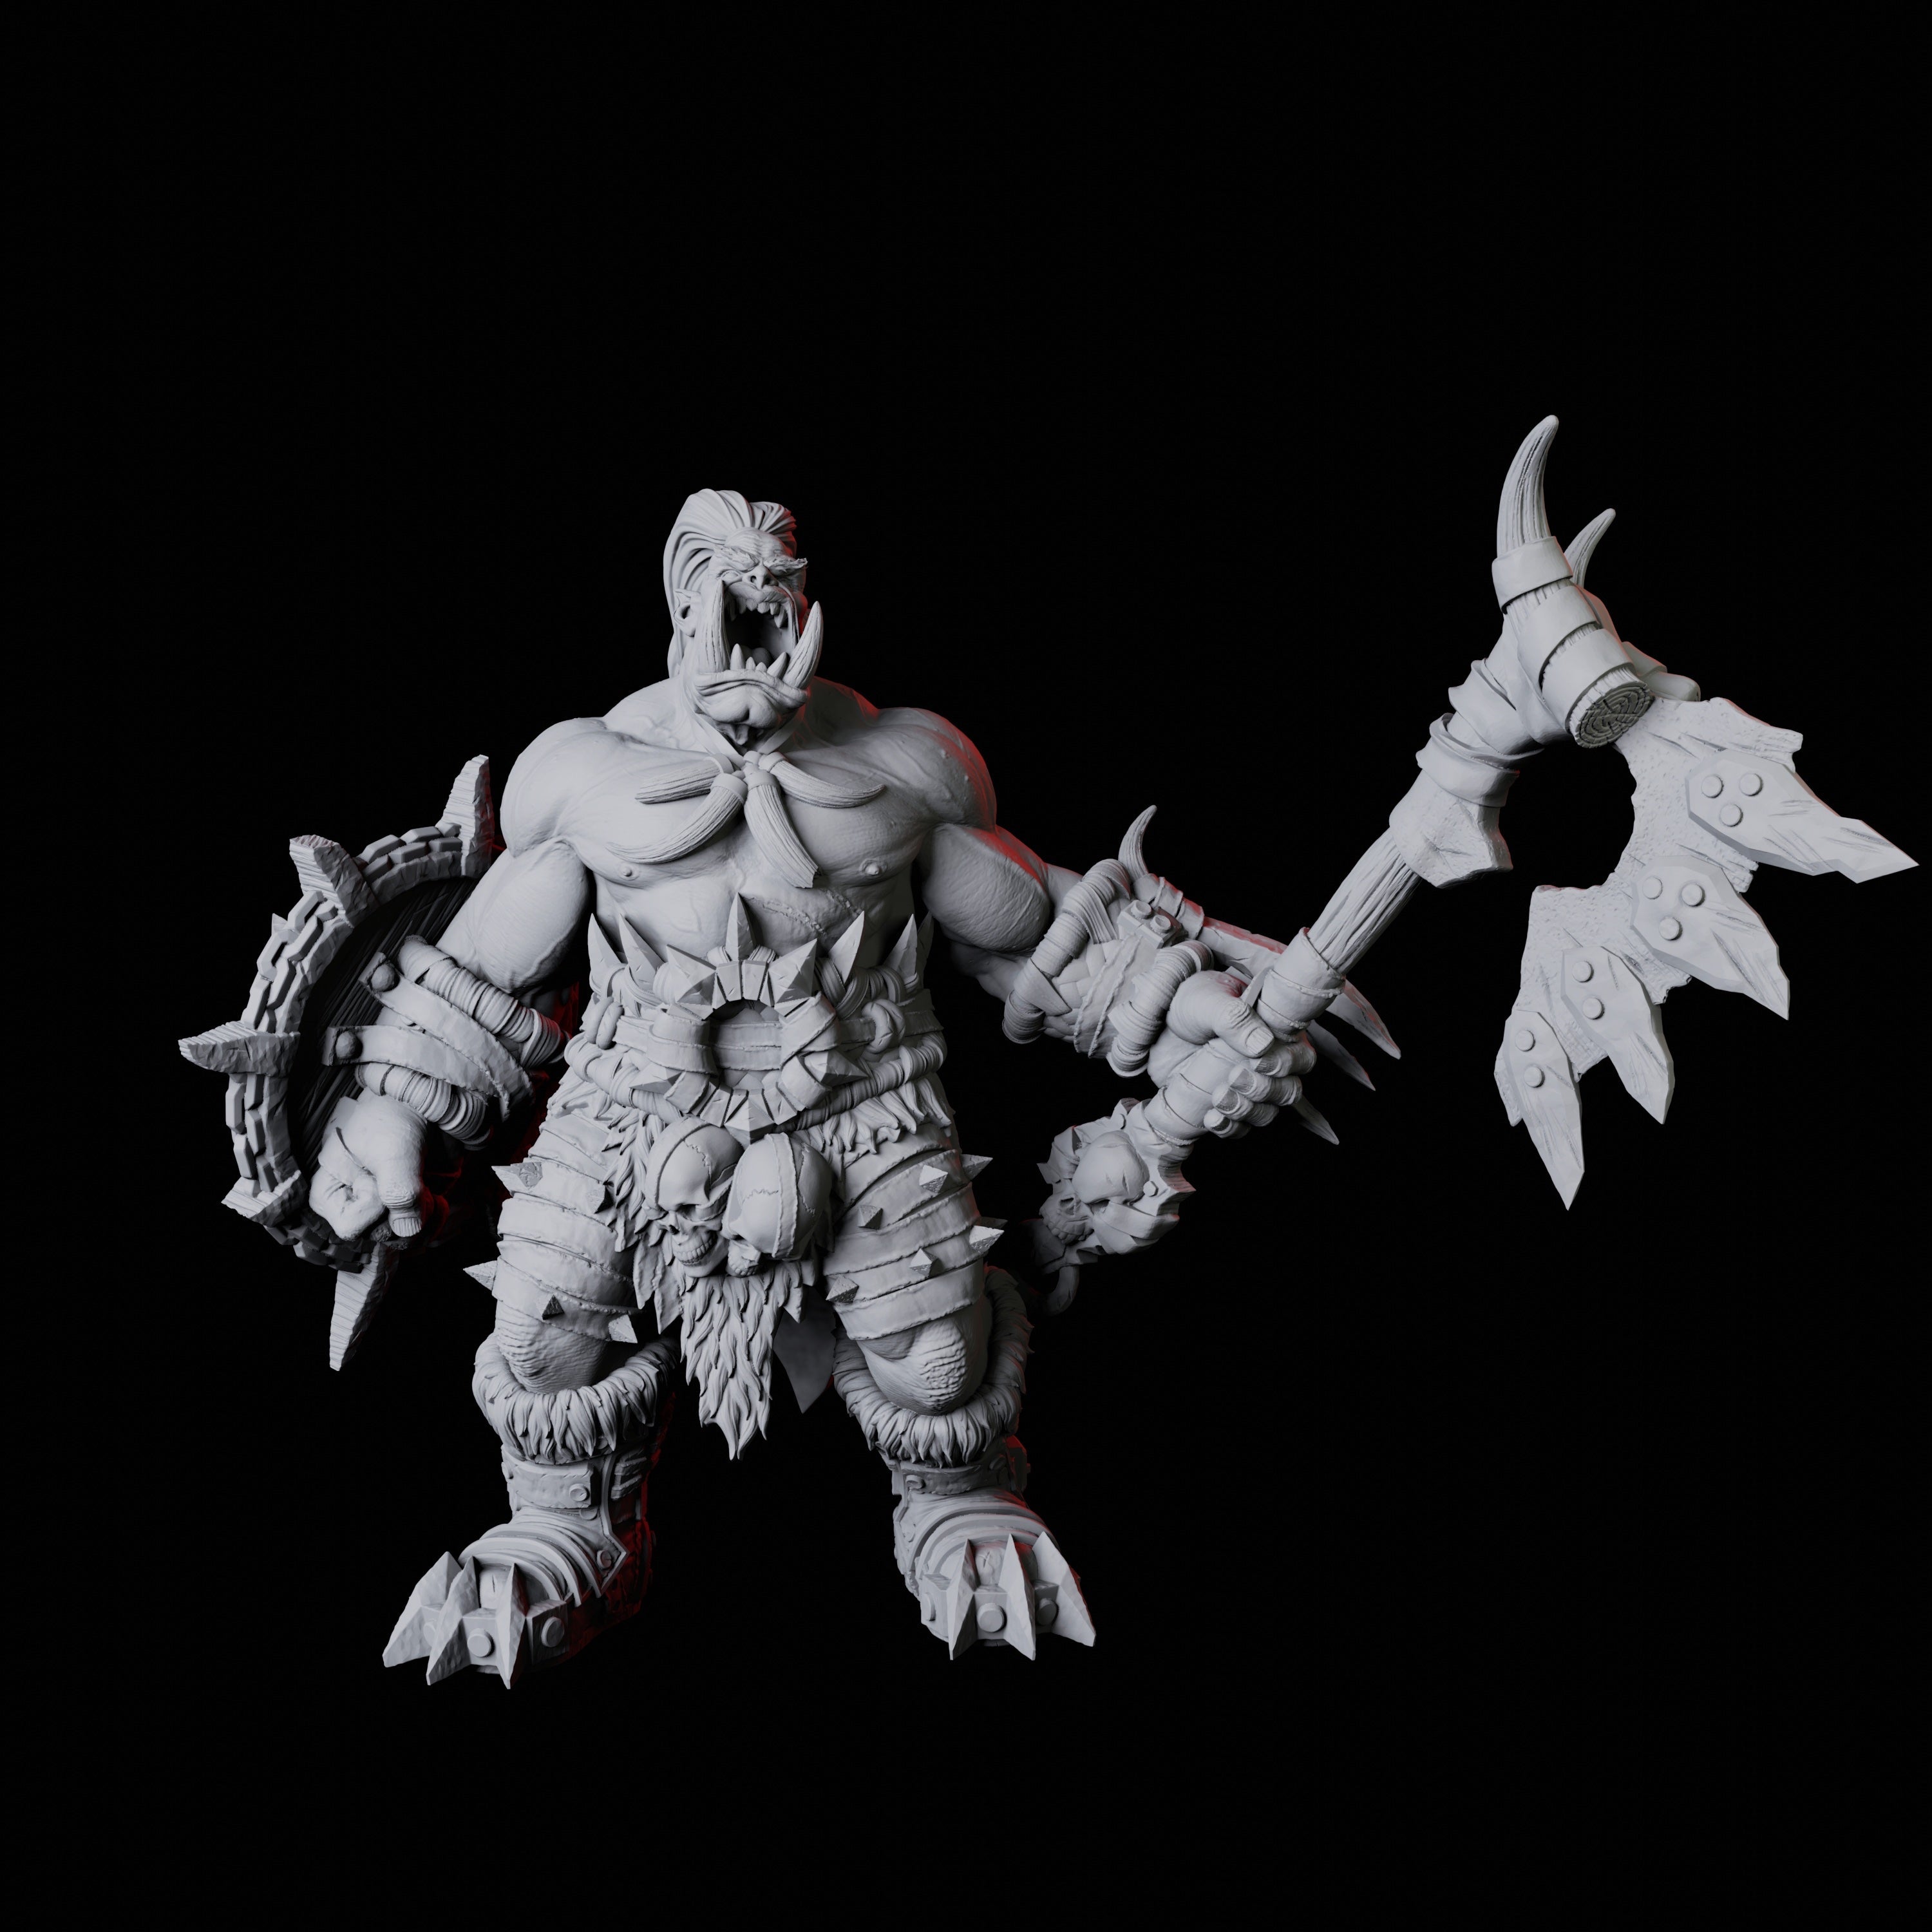 Orc Warrior C Miniature for Dungeons and Dragons